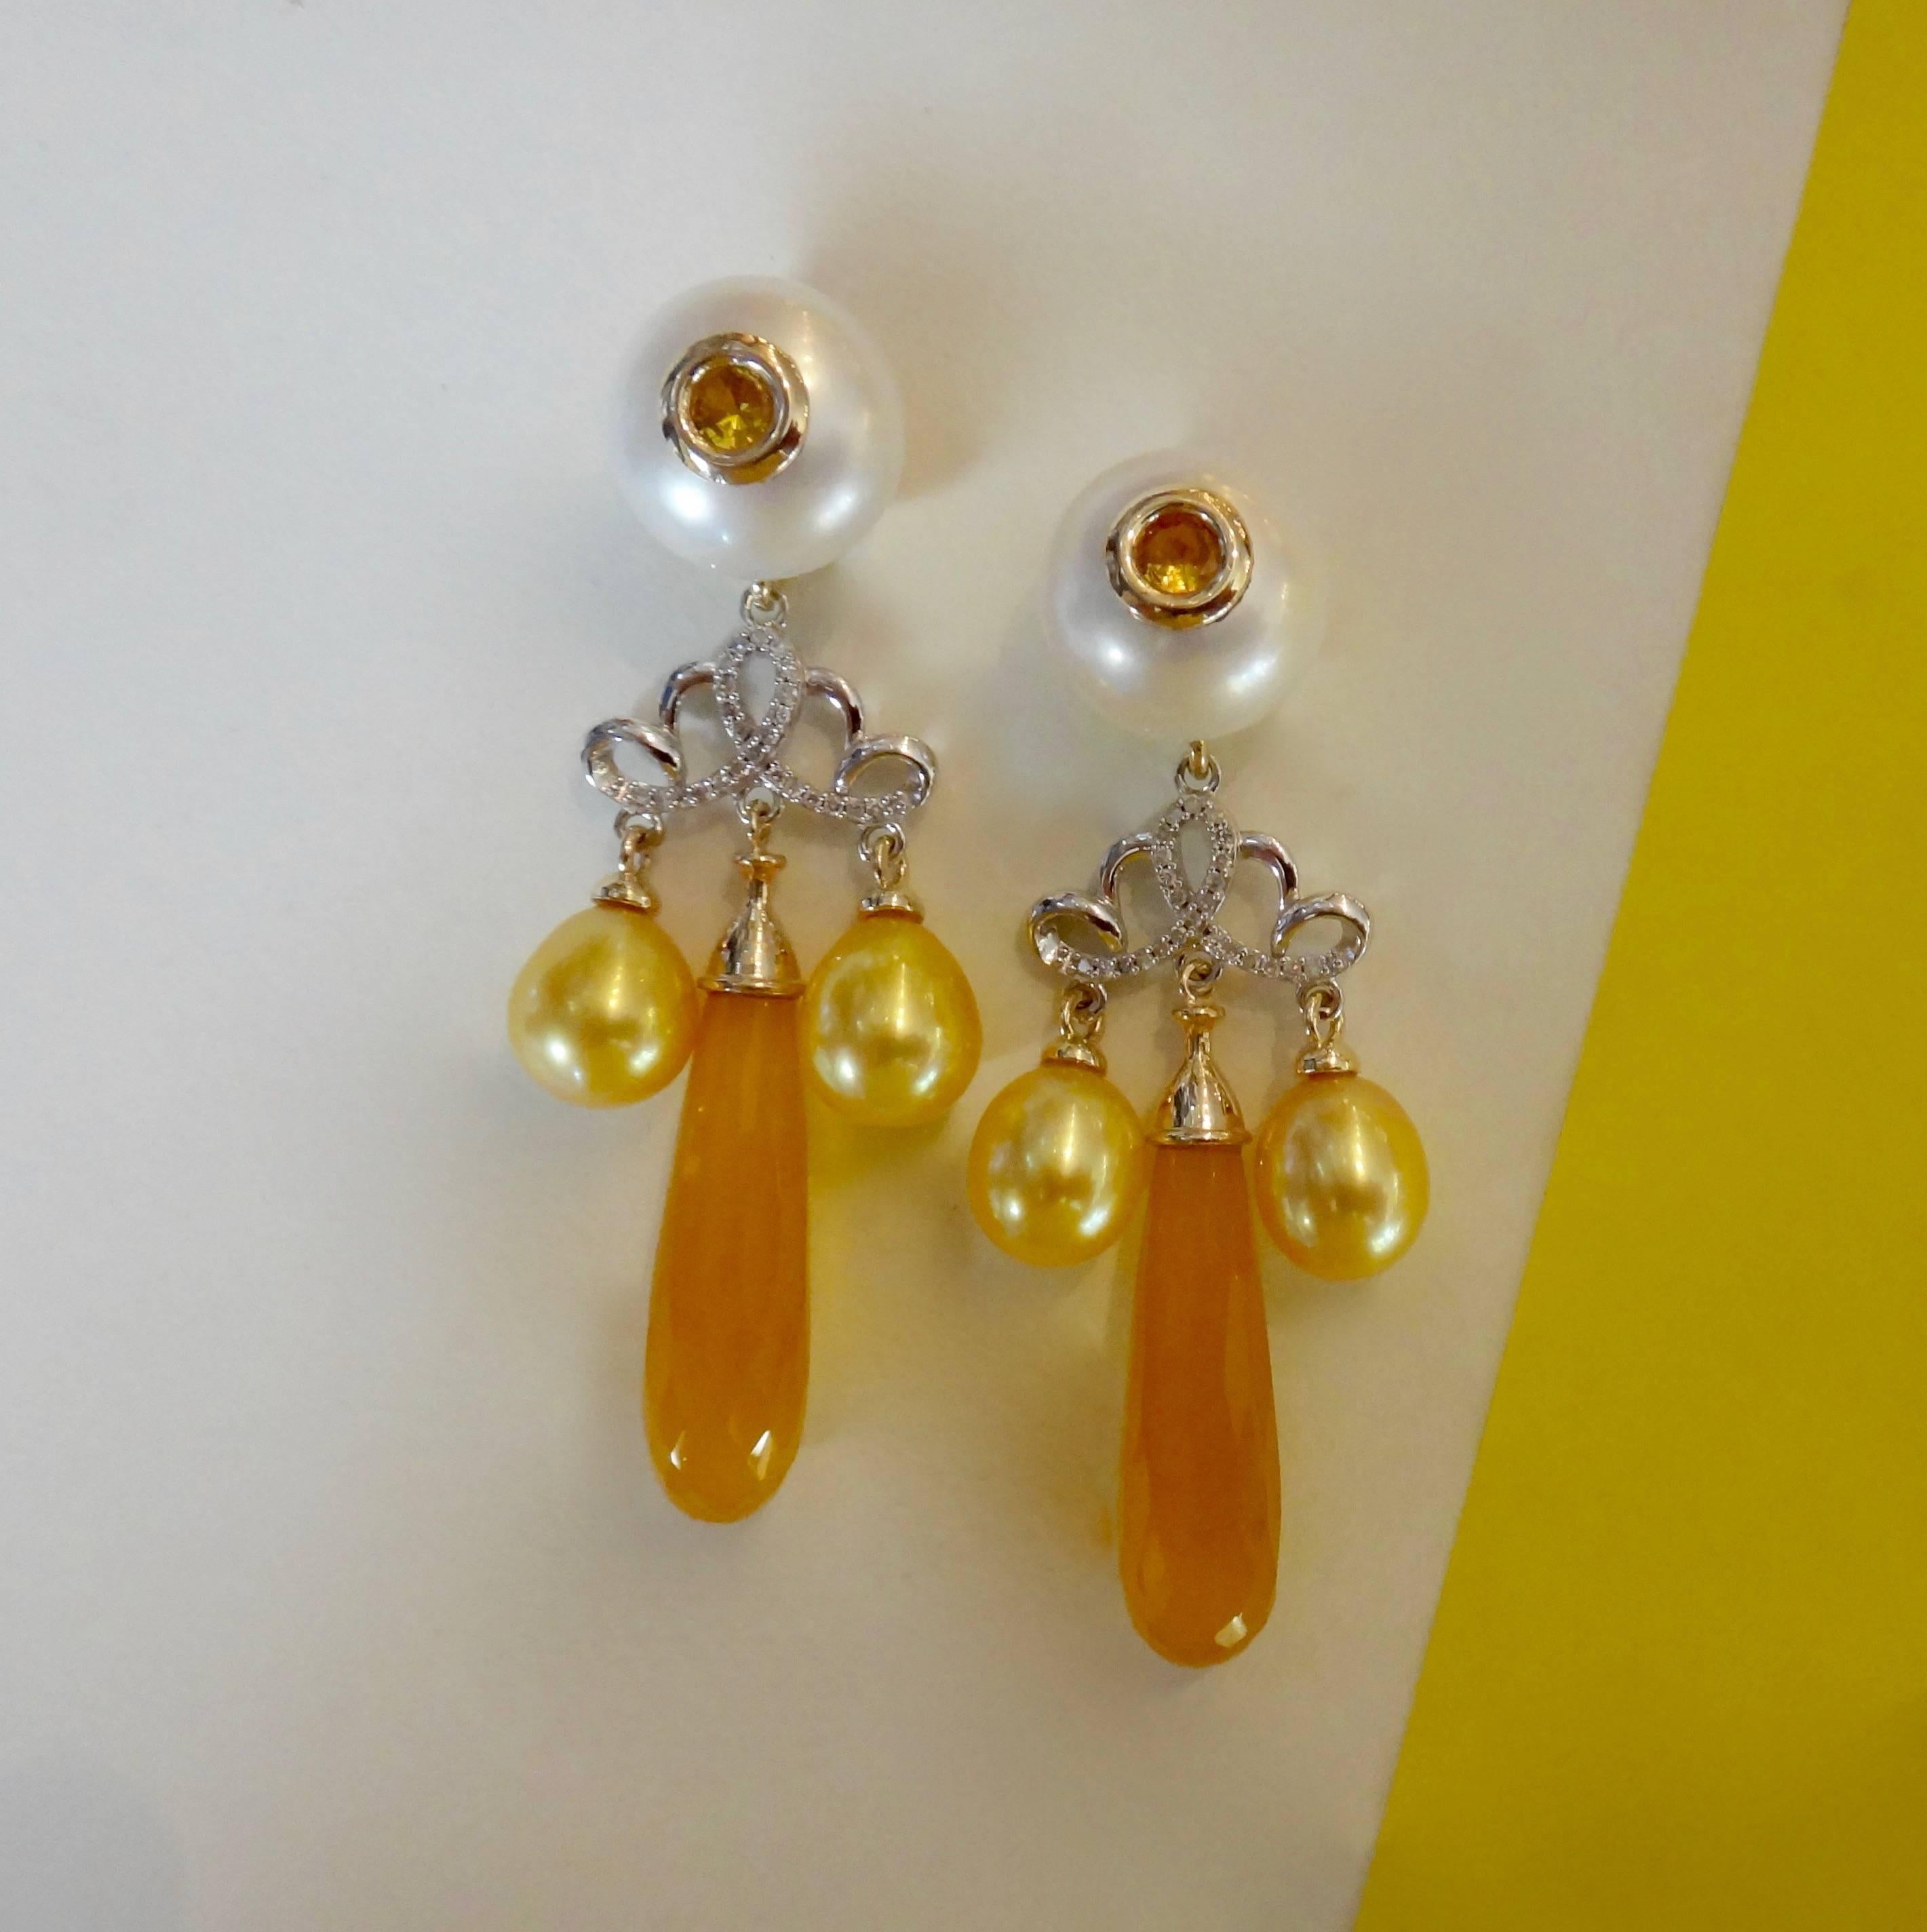 Golden chalcedony briolette in a rich yellow/orange color dangle from white button pearls that are drilled and set with bezeled yellow sapphires.  Gold drop shaped pearls further decorate these two tone, micro-pave diamond dangle earrings.  Post